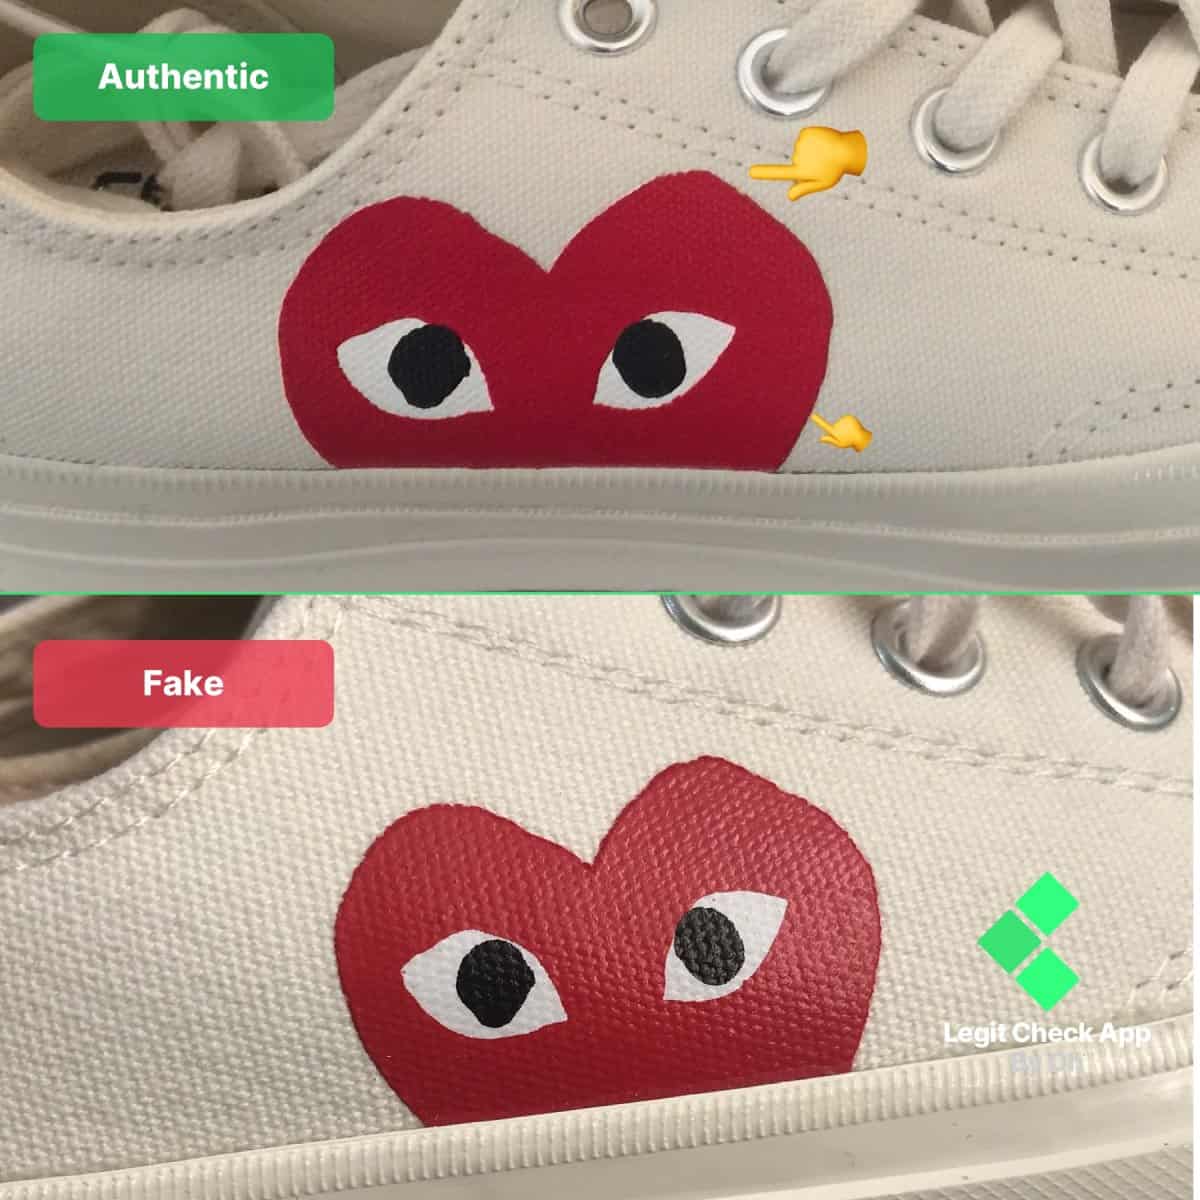 How To Spot Fake Comme Des Garcons CDG Converse - Legit Check By Ch